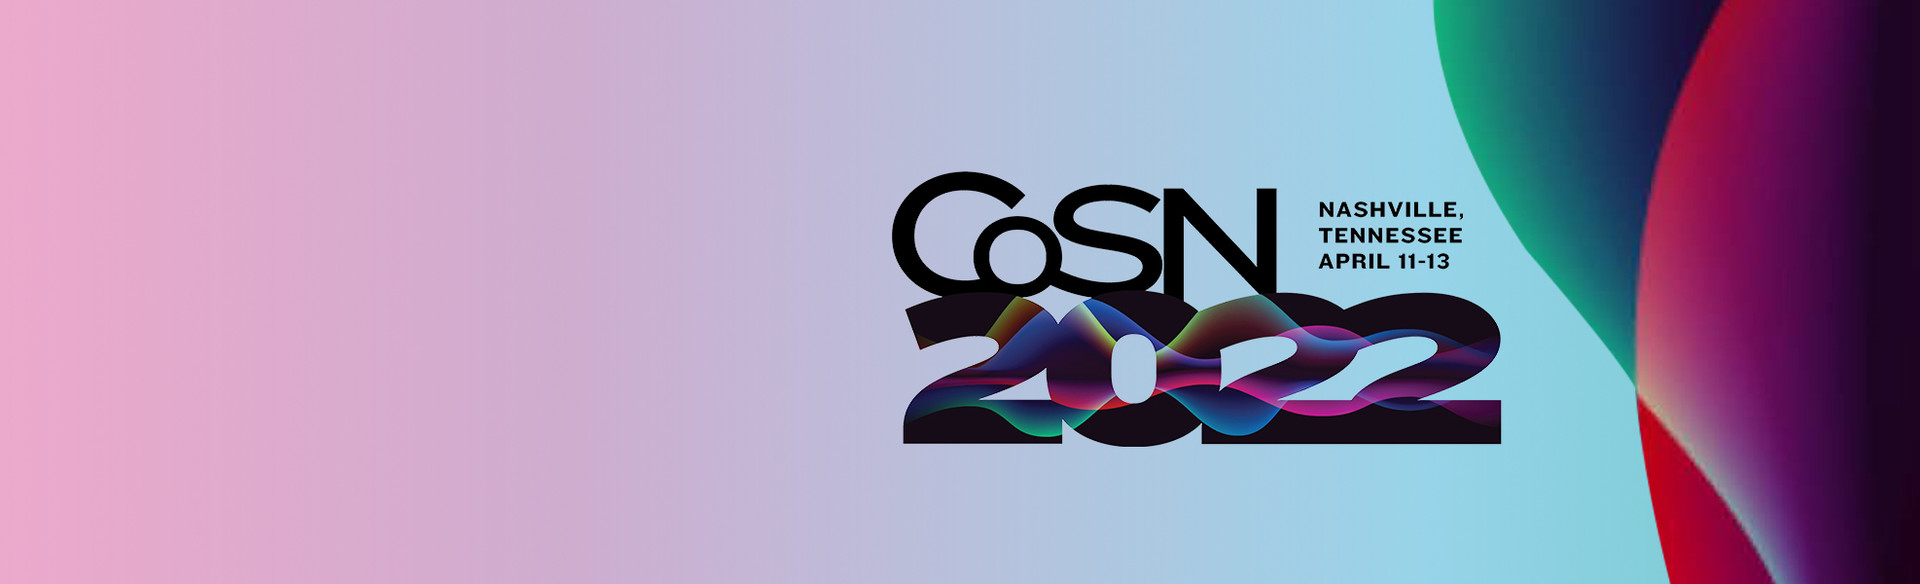 CoSN2022 Conference Insights